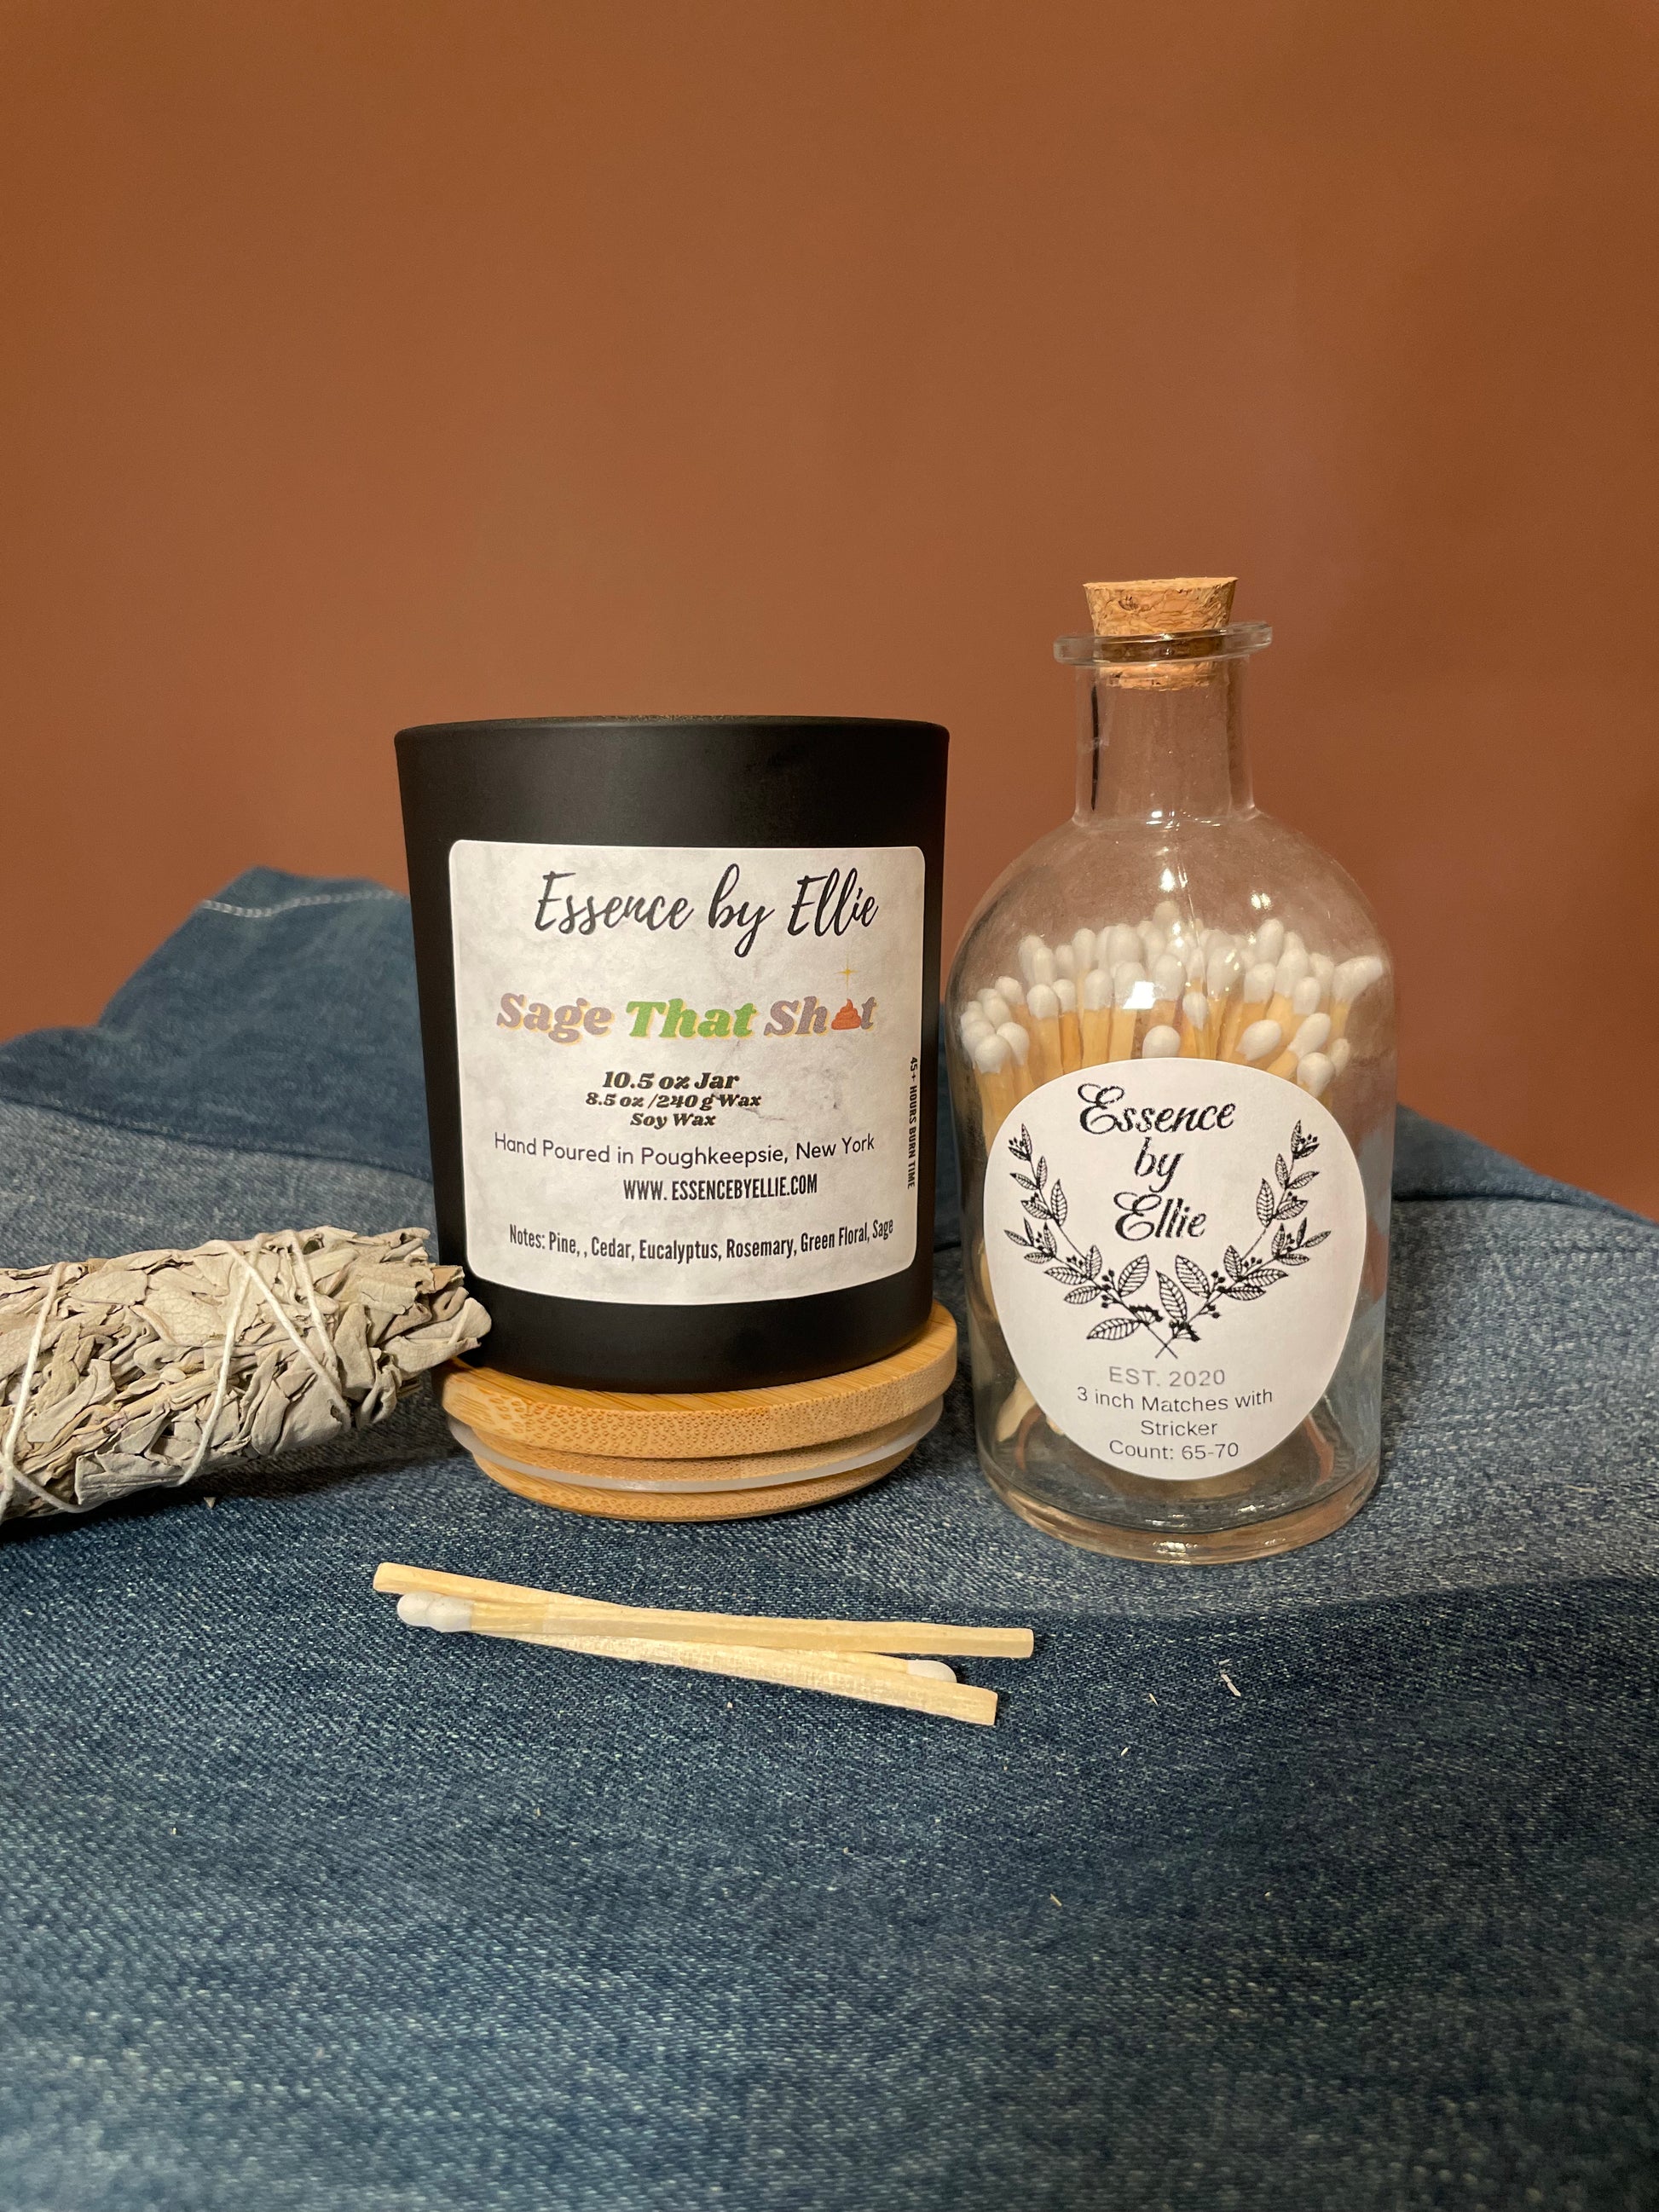 Sage that shit candle has notes of rosemary and sage.  Strong earth notes wooden wick candle